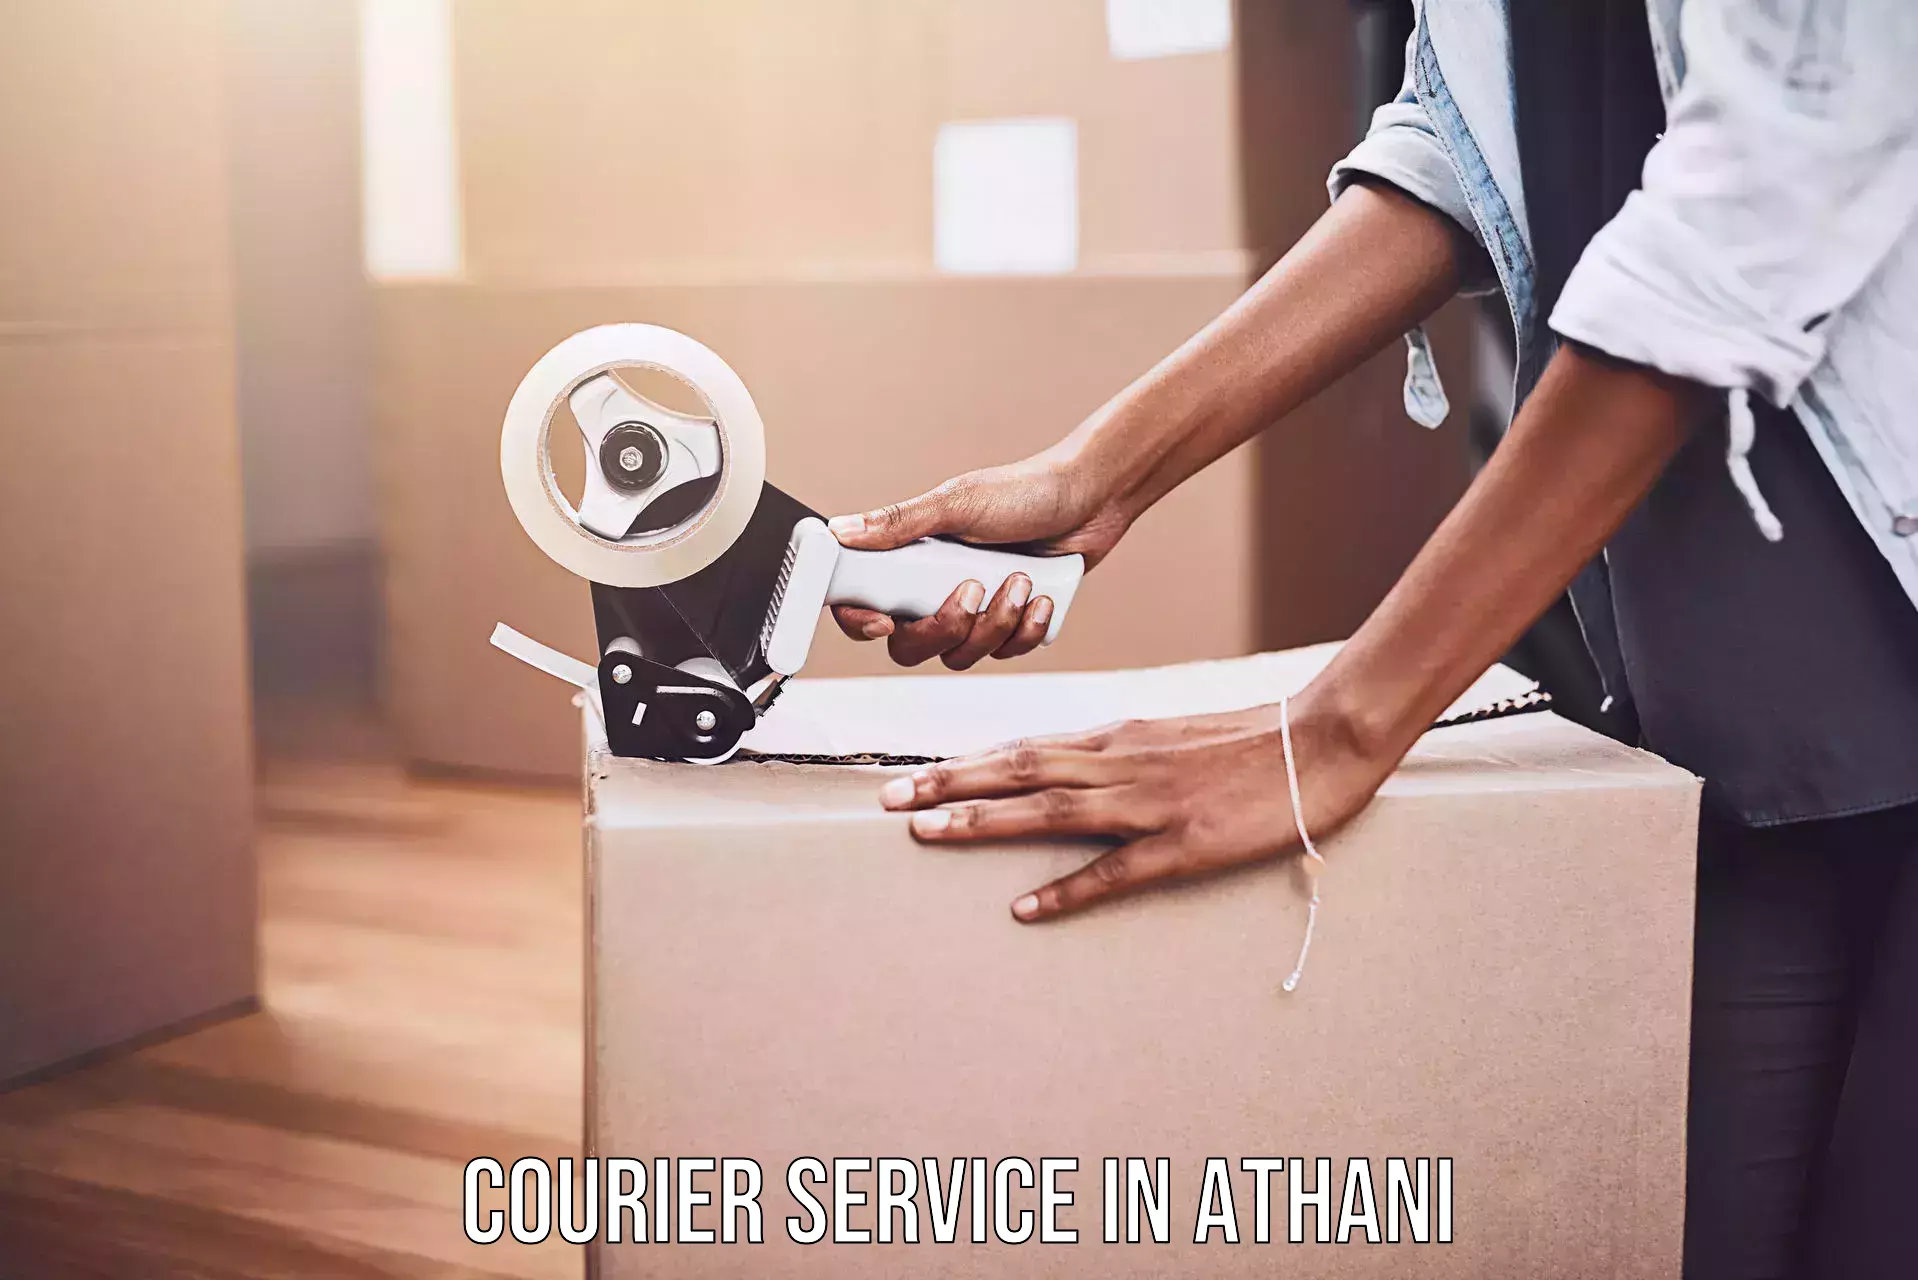 Return courier service in Athani